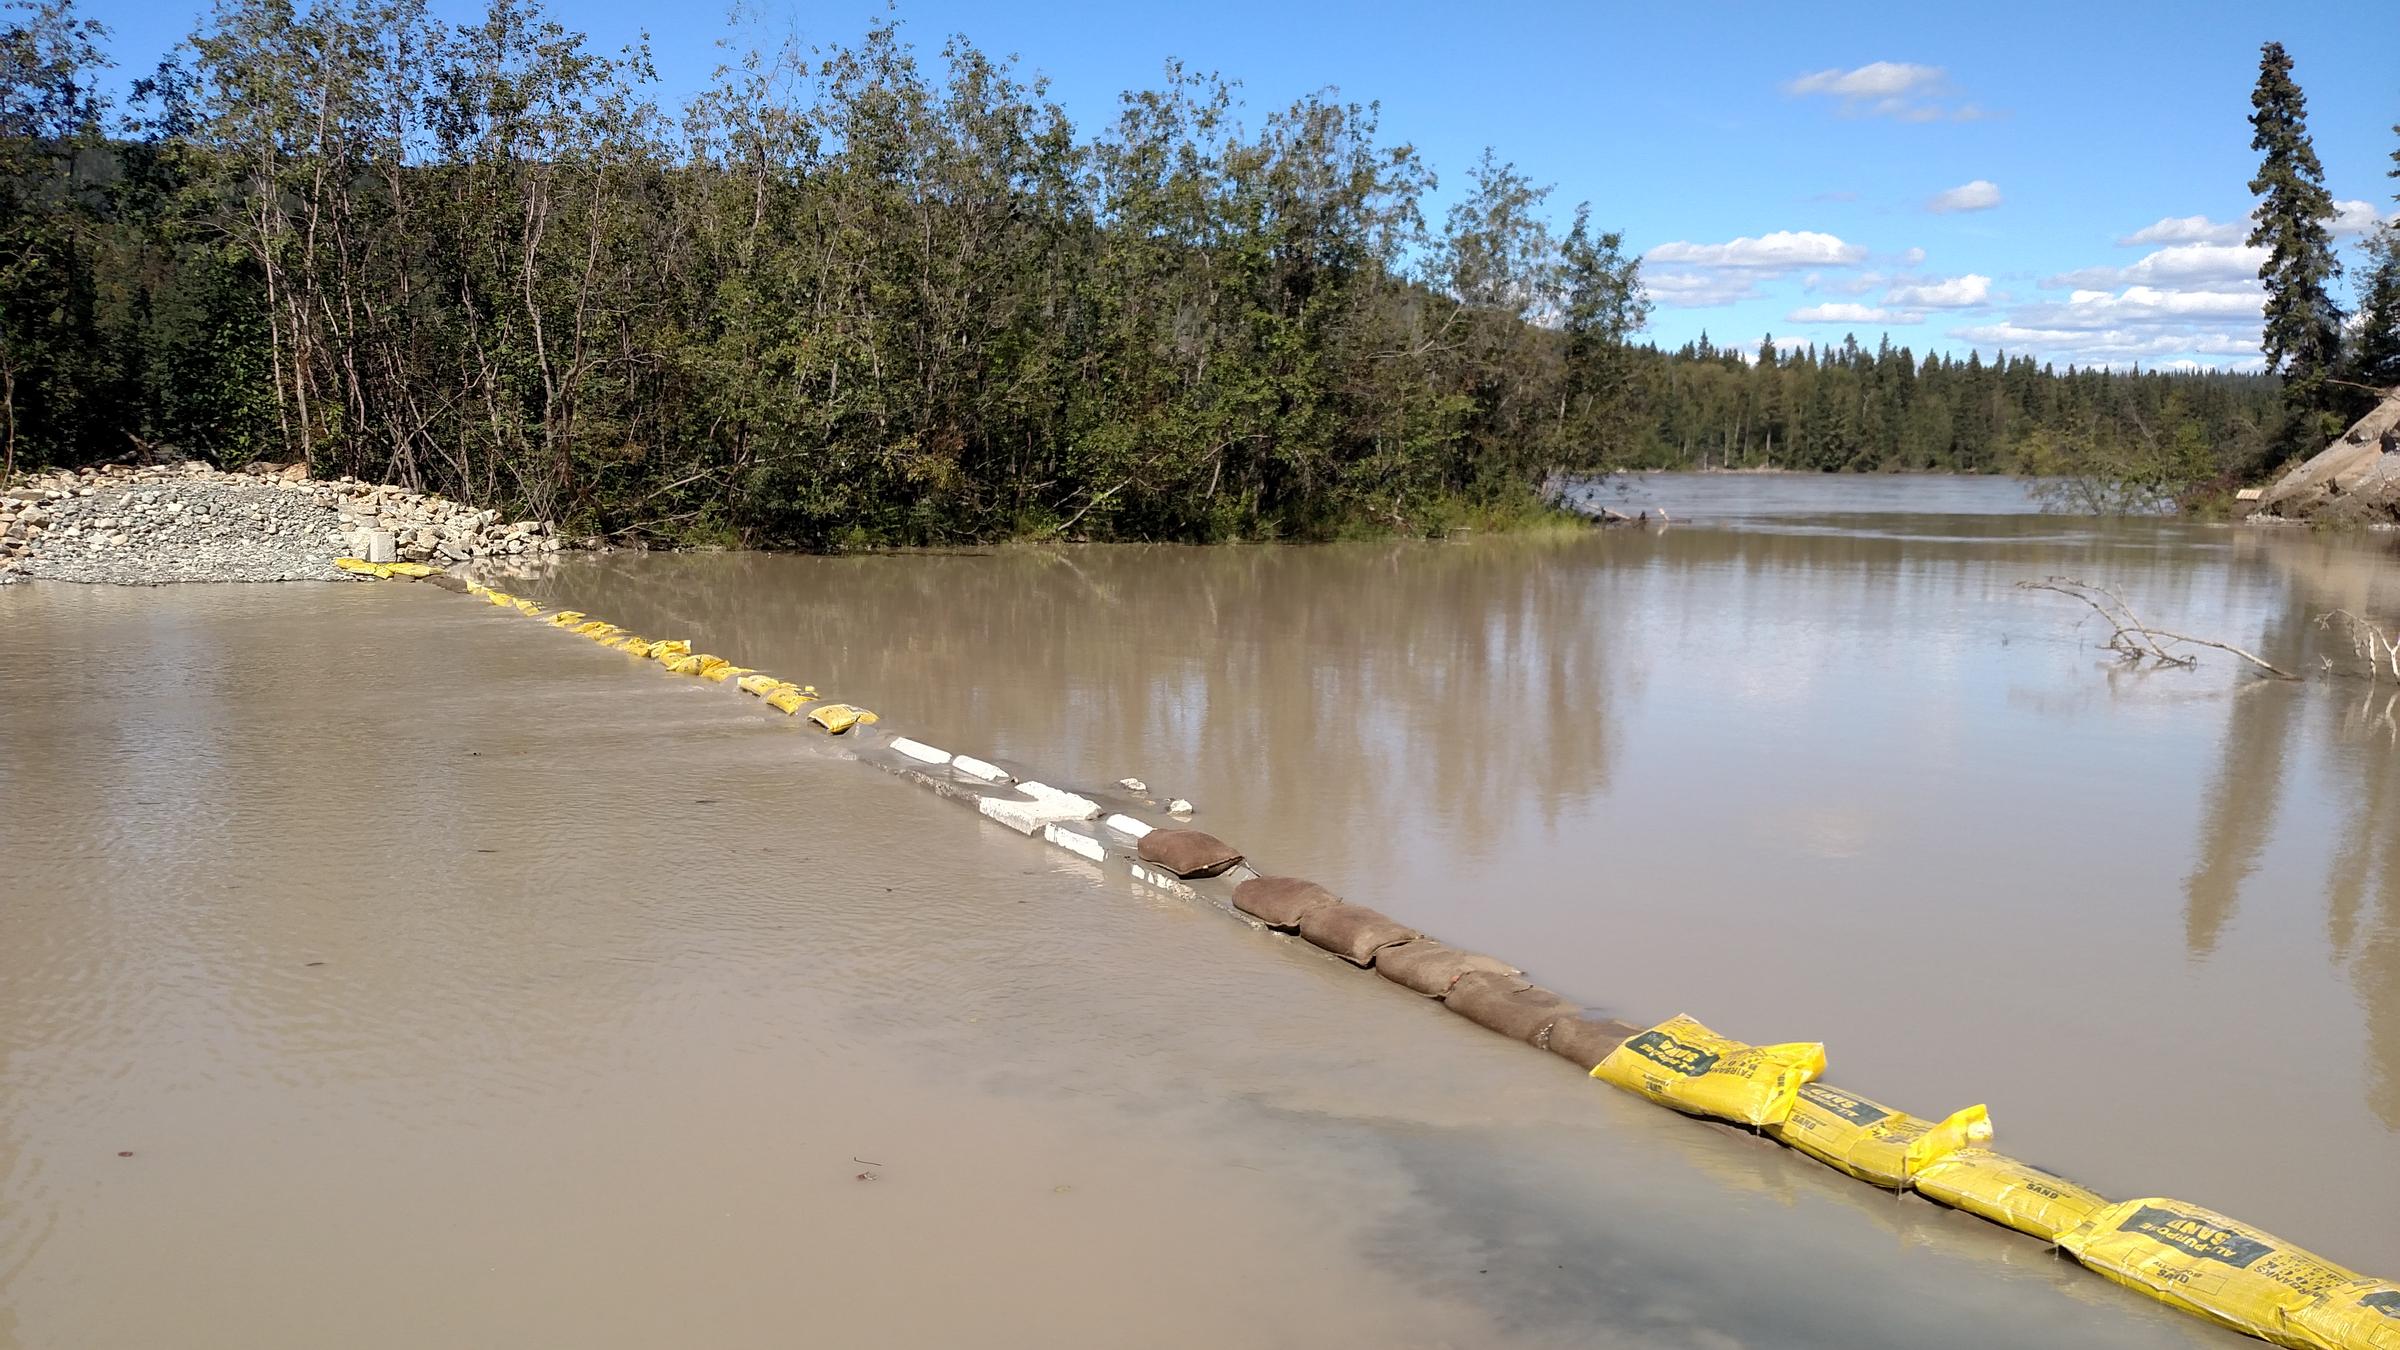 The 8-foot-tall dam that Gorman built earlier this year across the slough was submerged after recent rains raised the Tanana River level. Gorman laid a course of sandbags over the top of the structure to slow the river current and the erosion it causes. "It's holding," Gorman says. (Photo by Tim Ellis, KUAC - Fairbanks)